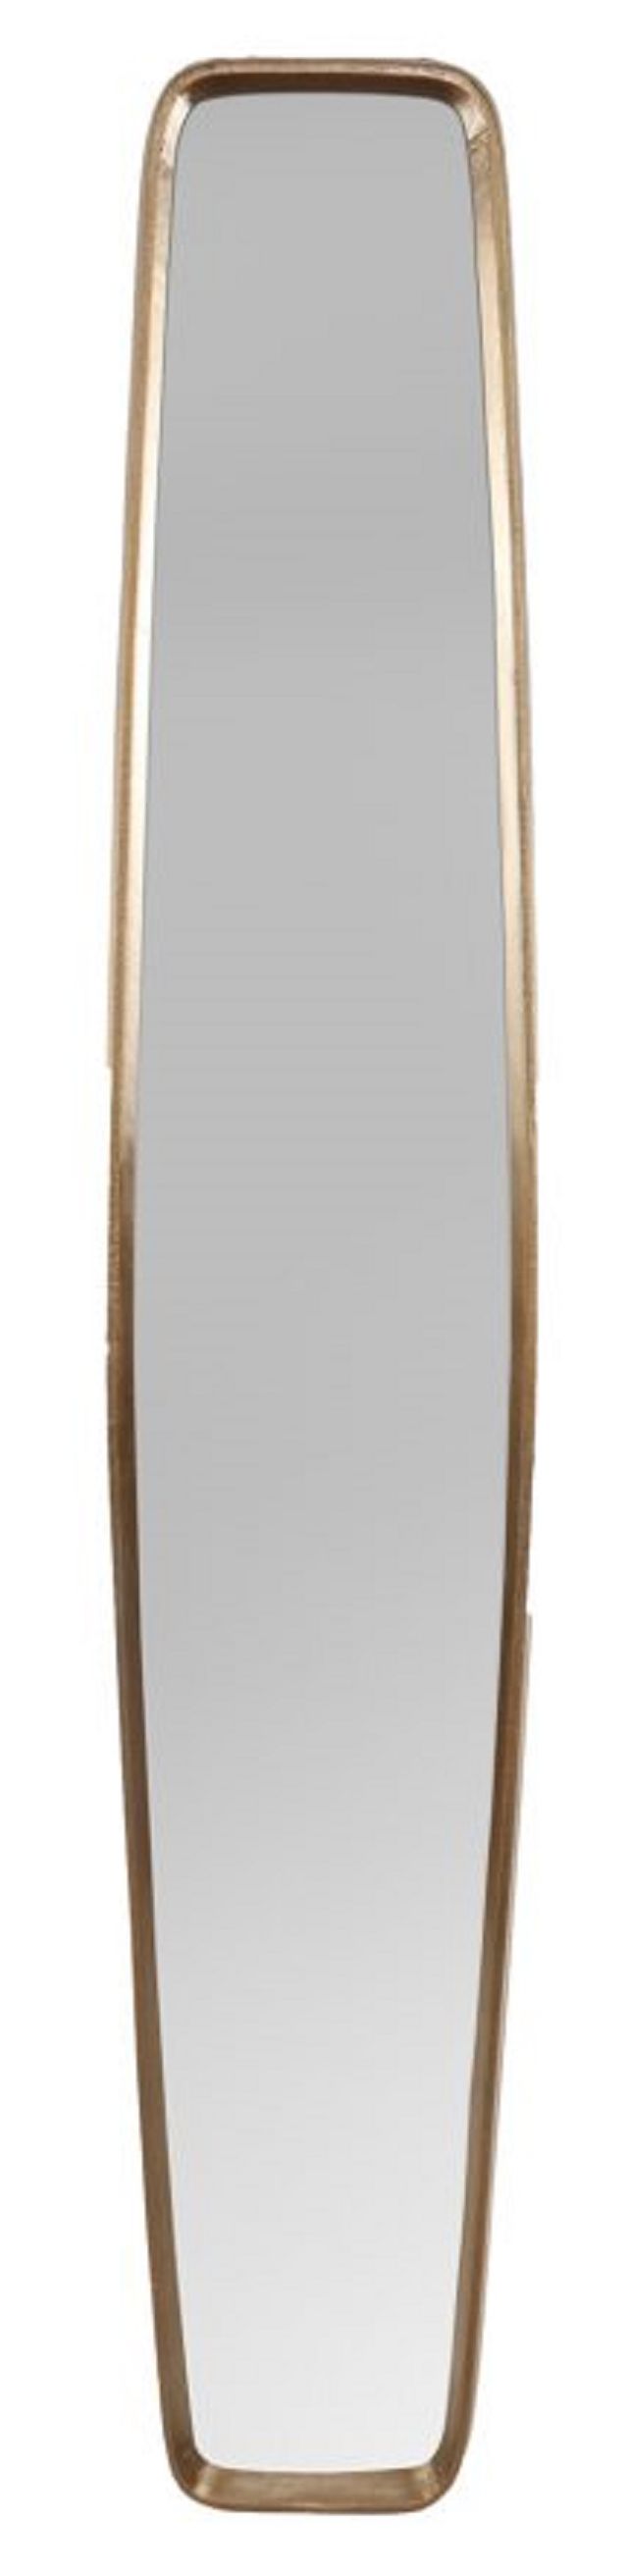 Moe's Home Collection Fitzroy Gold Tall Mirror